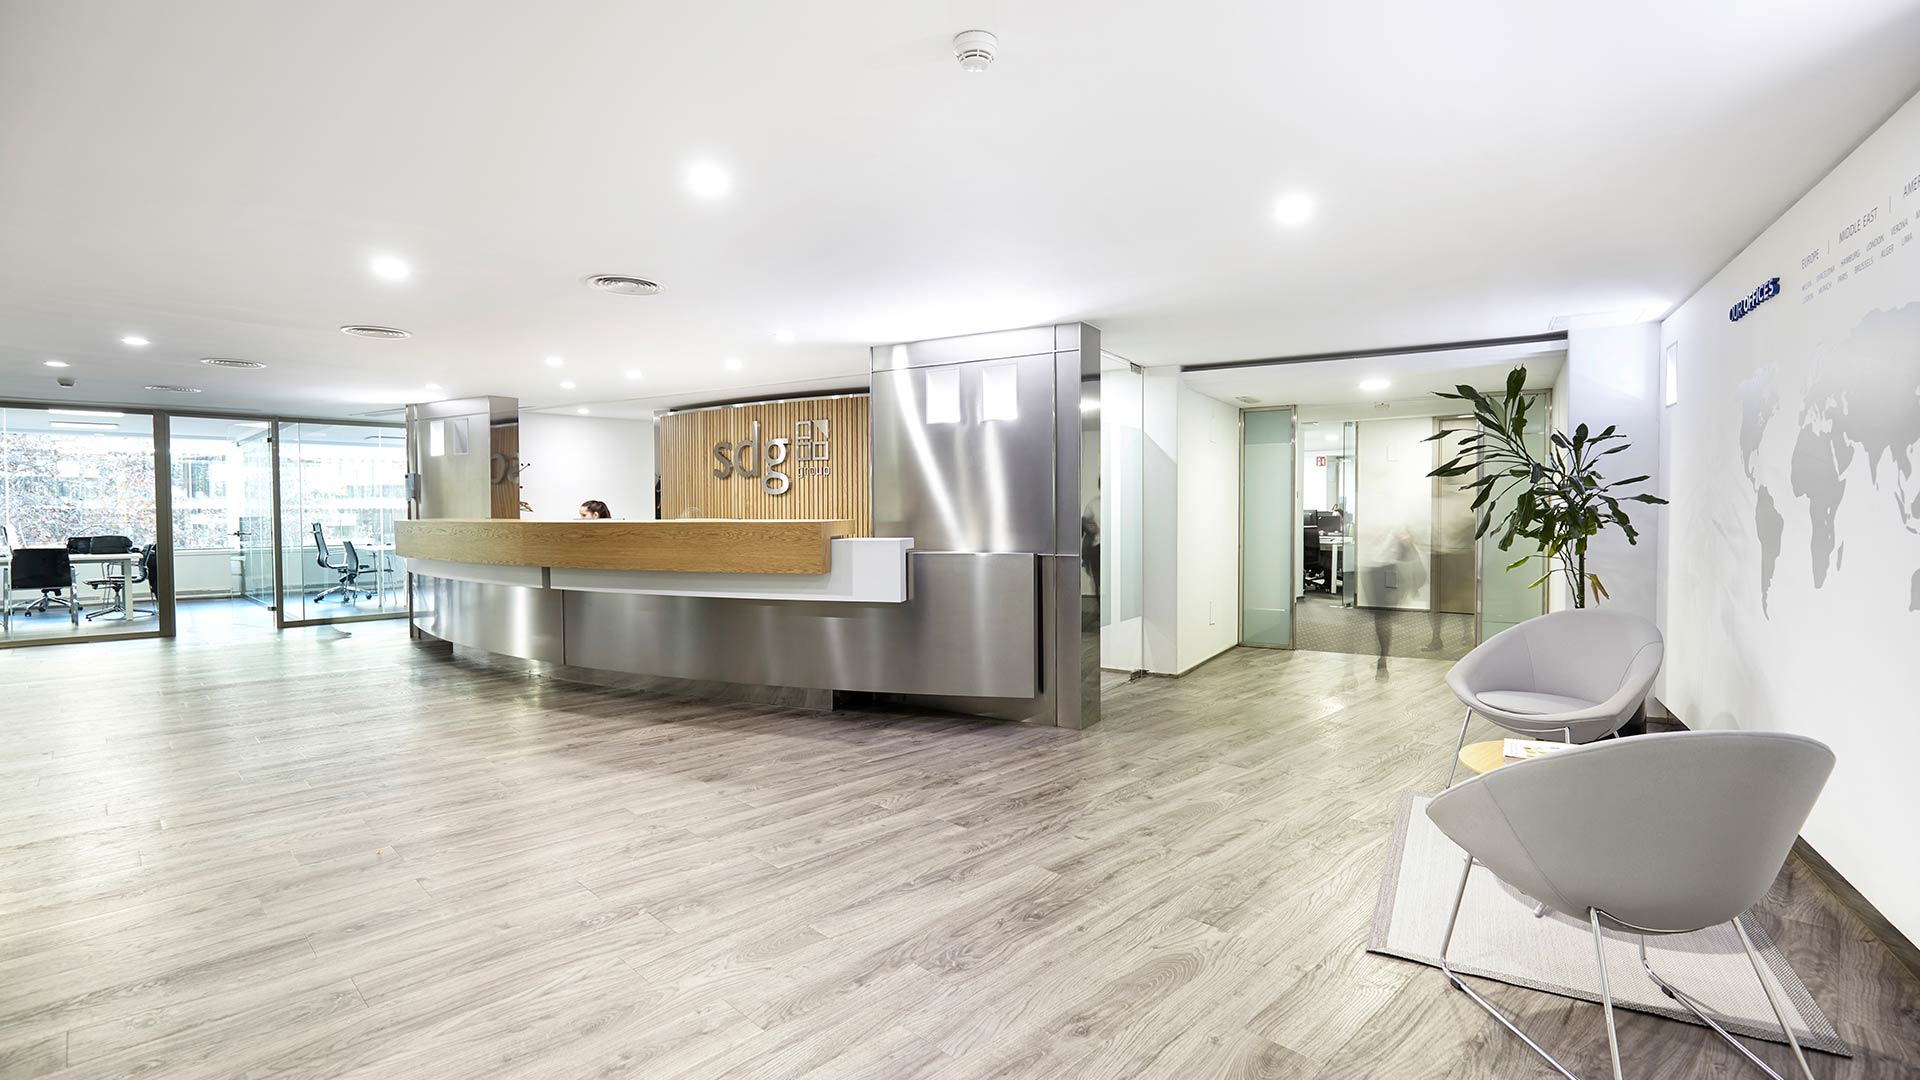 Design and build of SDG offices in Barcelona